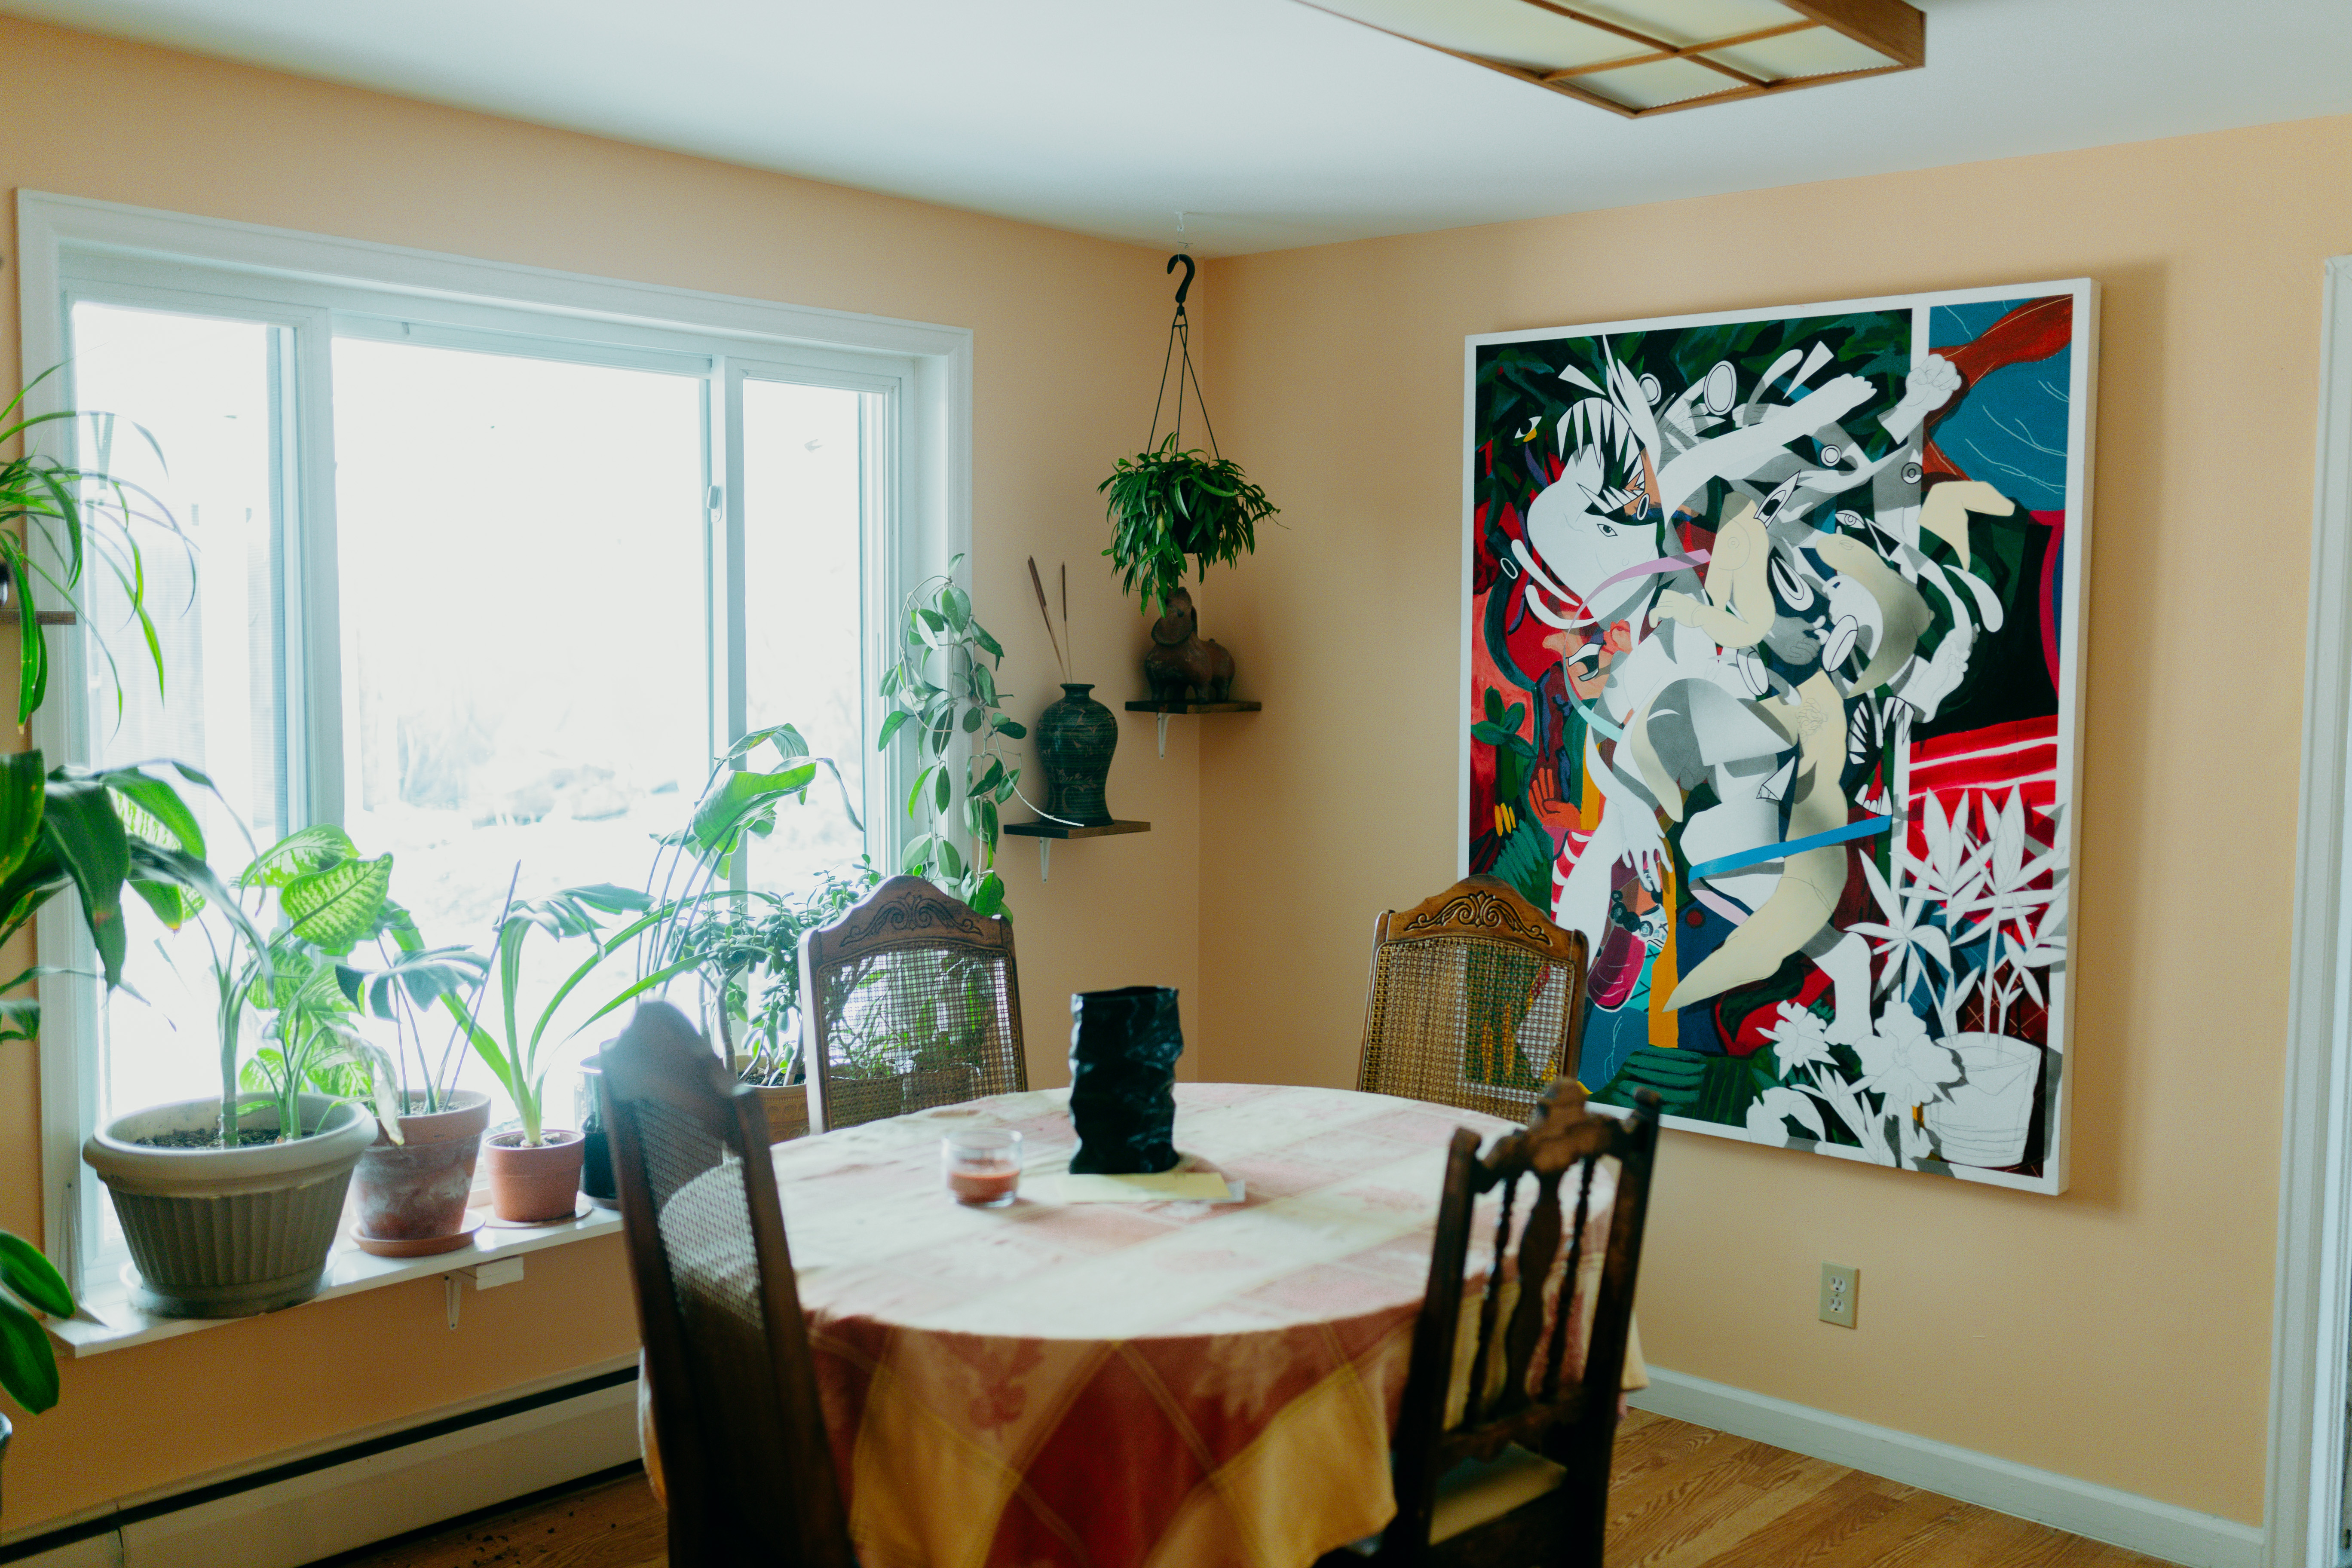 A dining room filled with plants. On the wall is a large abstract painting. A round table with four chairs rests in the center of the room. 